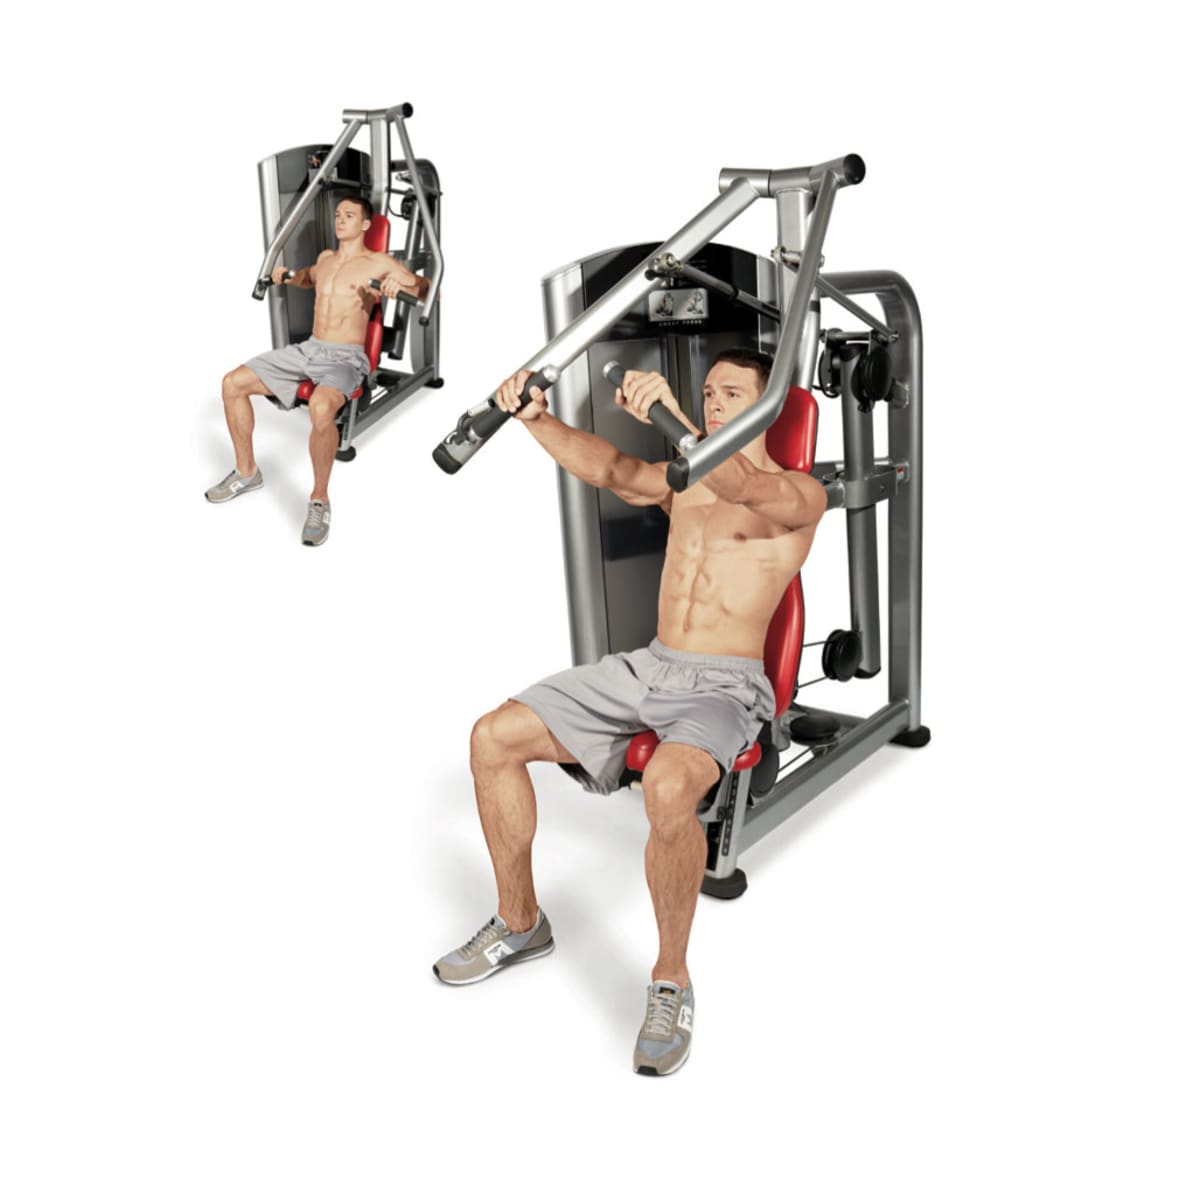 Human Body Weight Machine: Why to Keep at Home